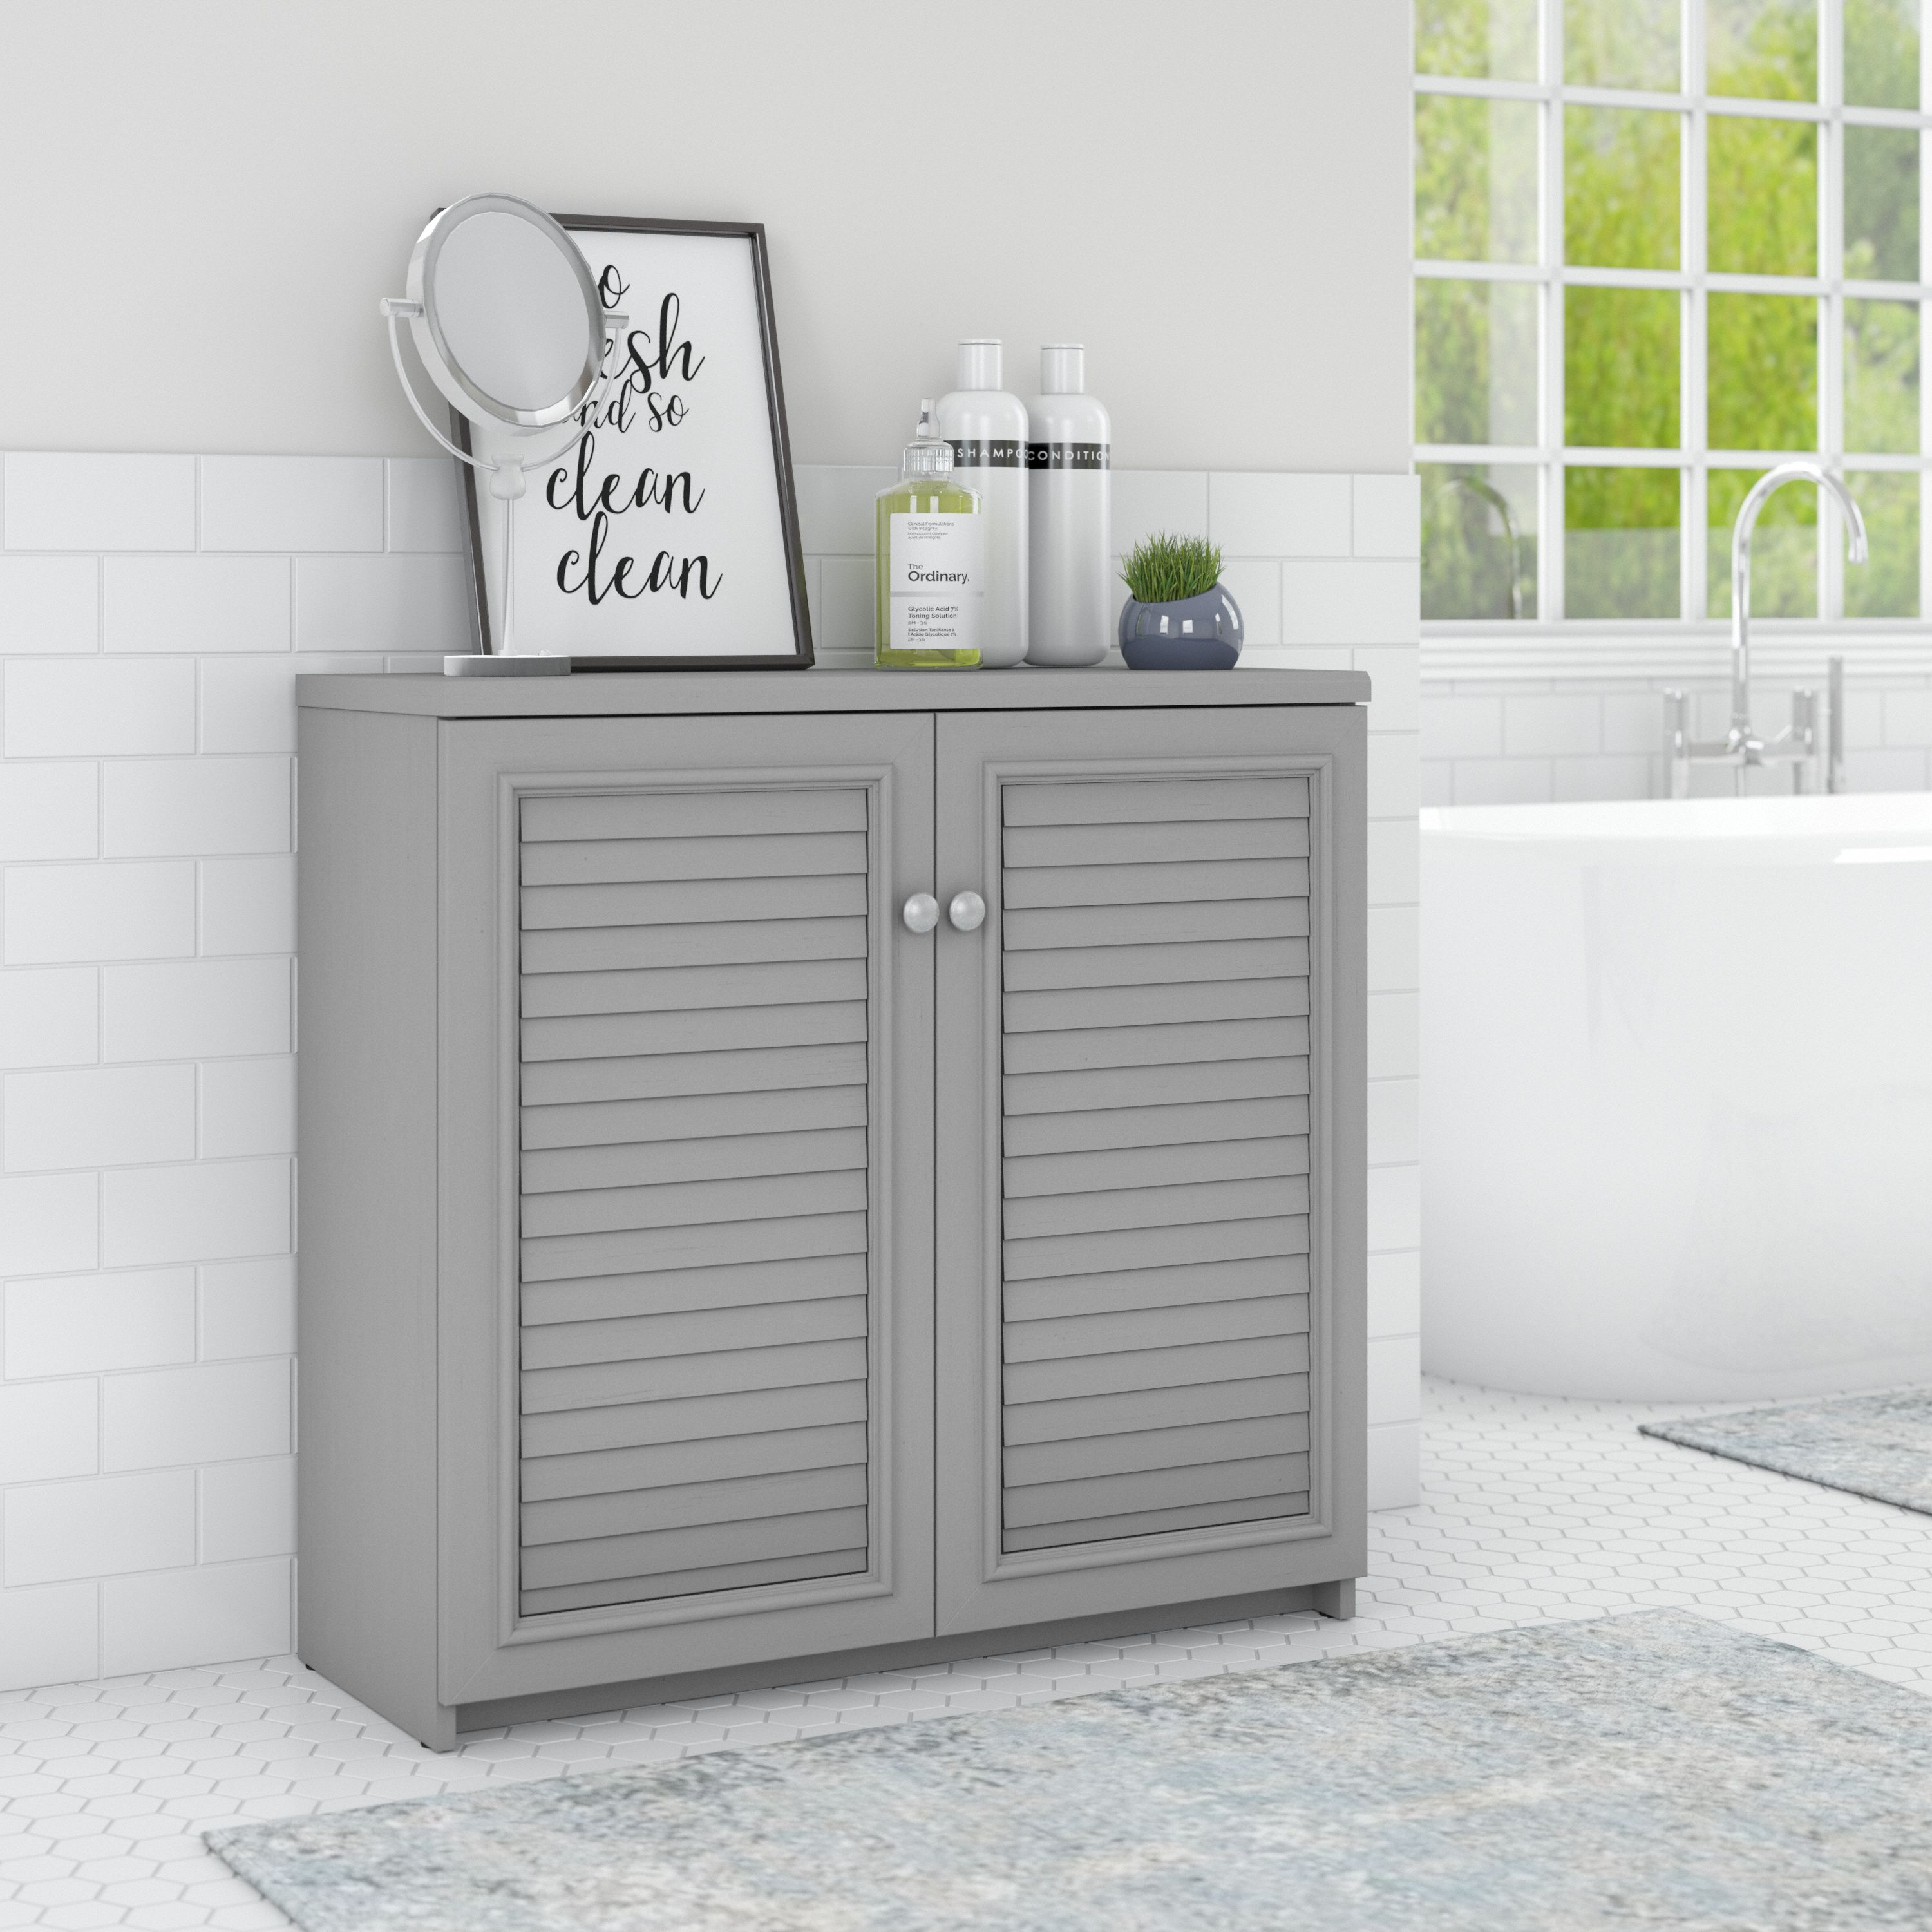 Shop Bush Furniture Fairview Small Storage Cabinet with Doors and Shelves 06 WC53596-03 #color_cape cod gray